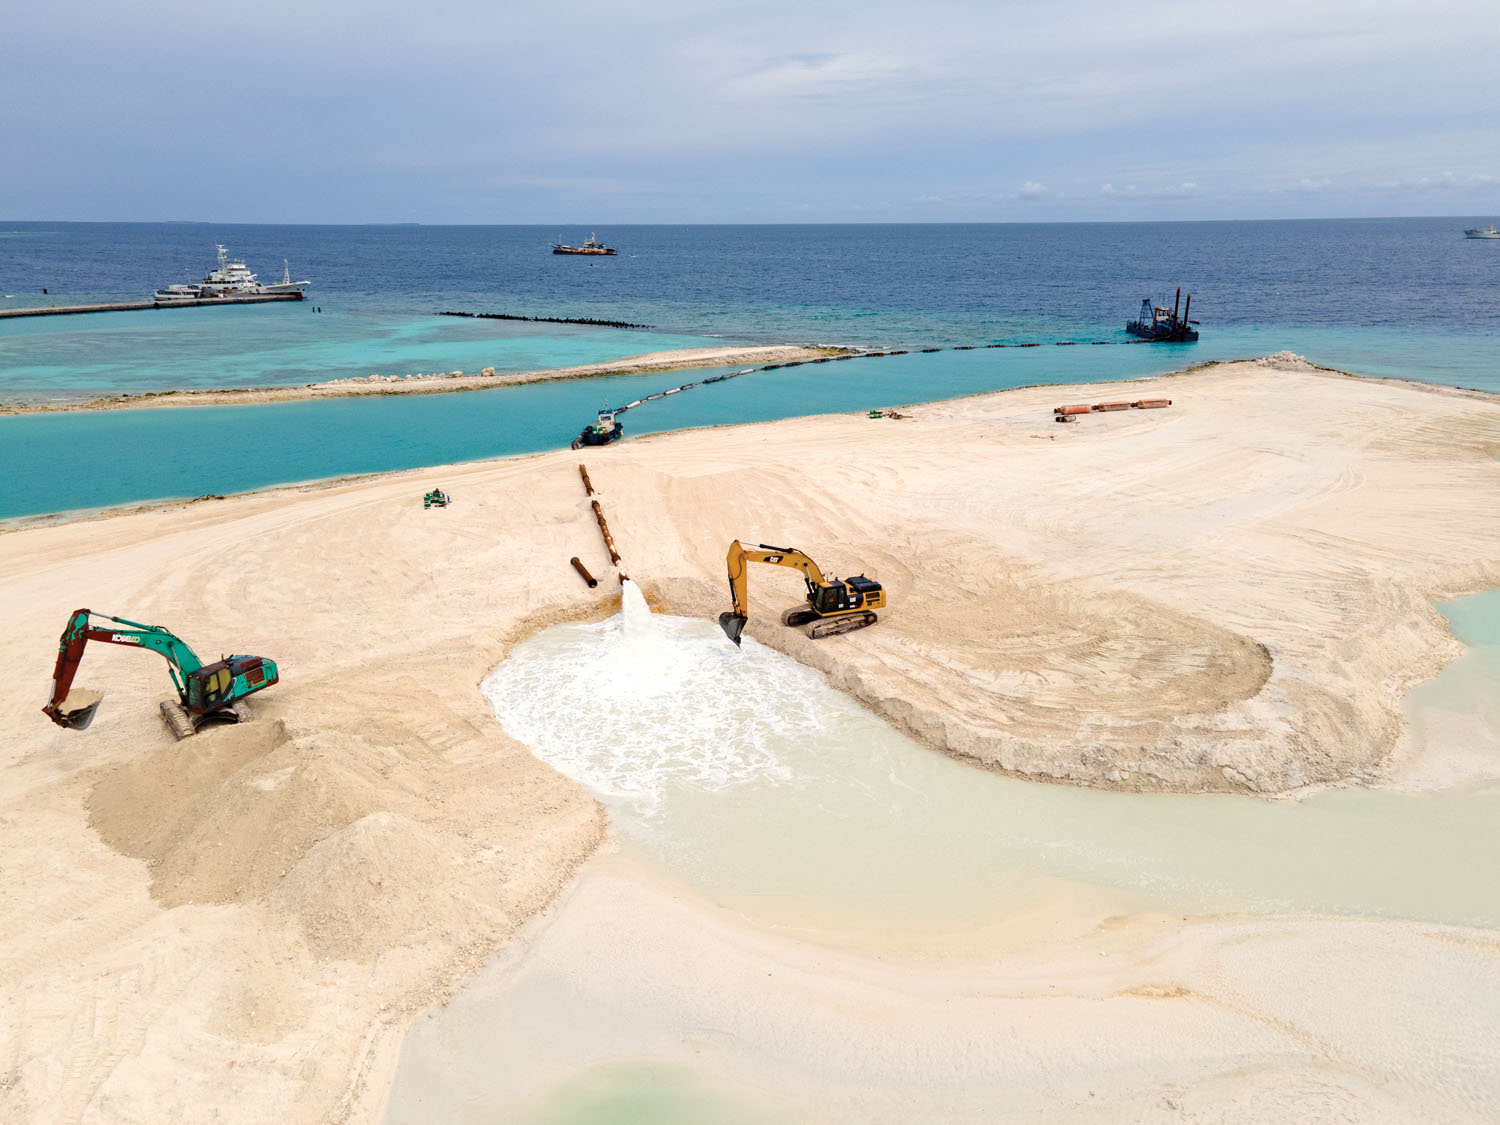 A land-reclamation project to accommodate growing infrastructure on the island of Felivaru.